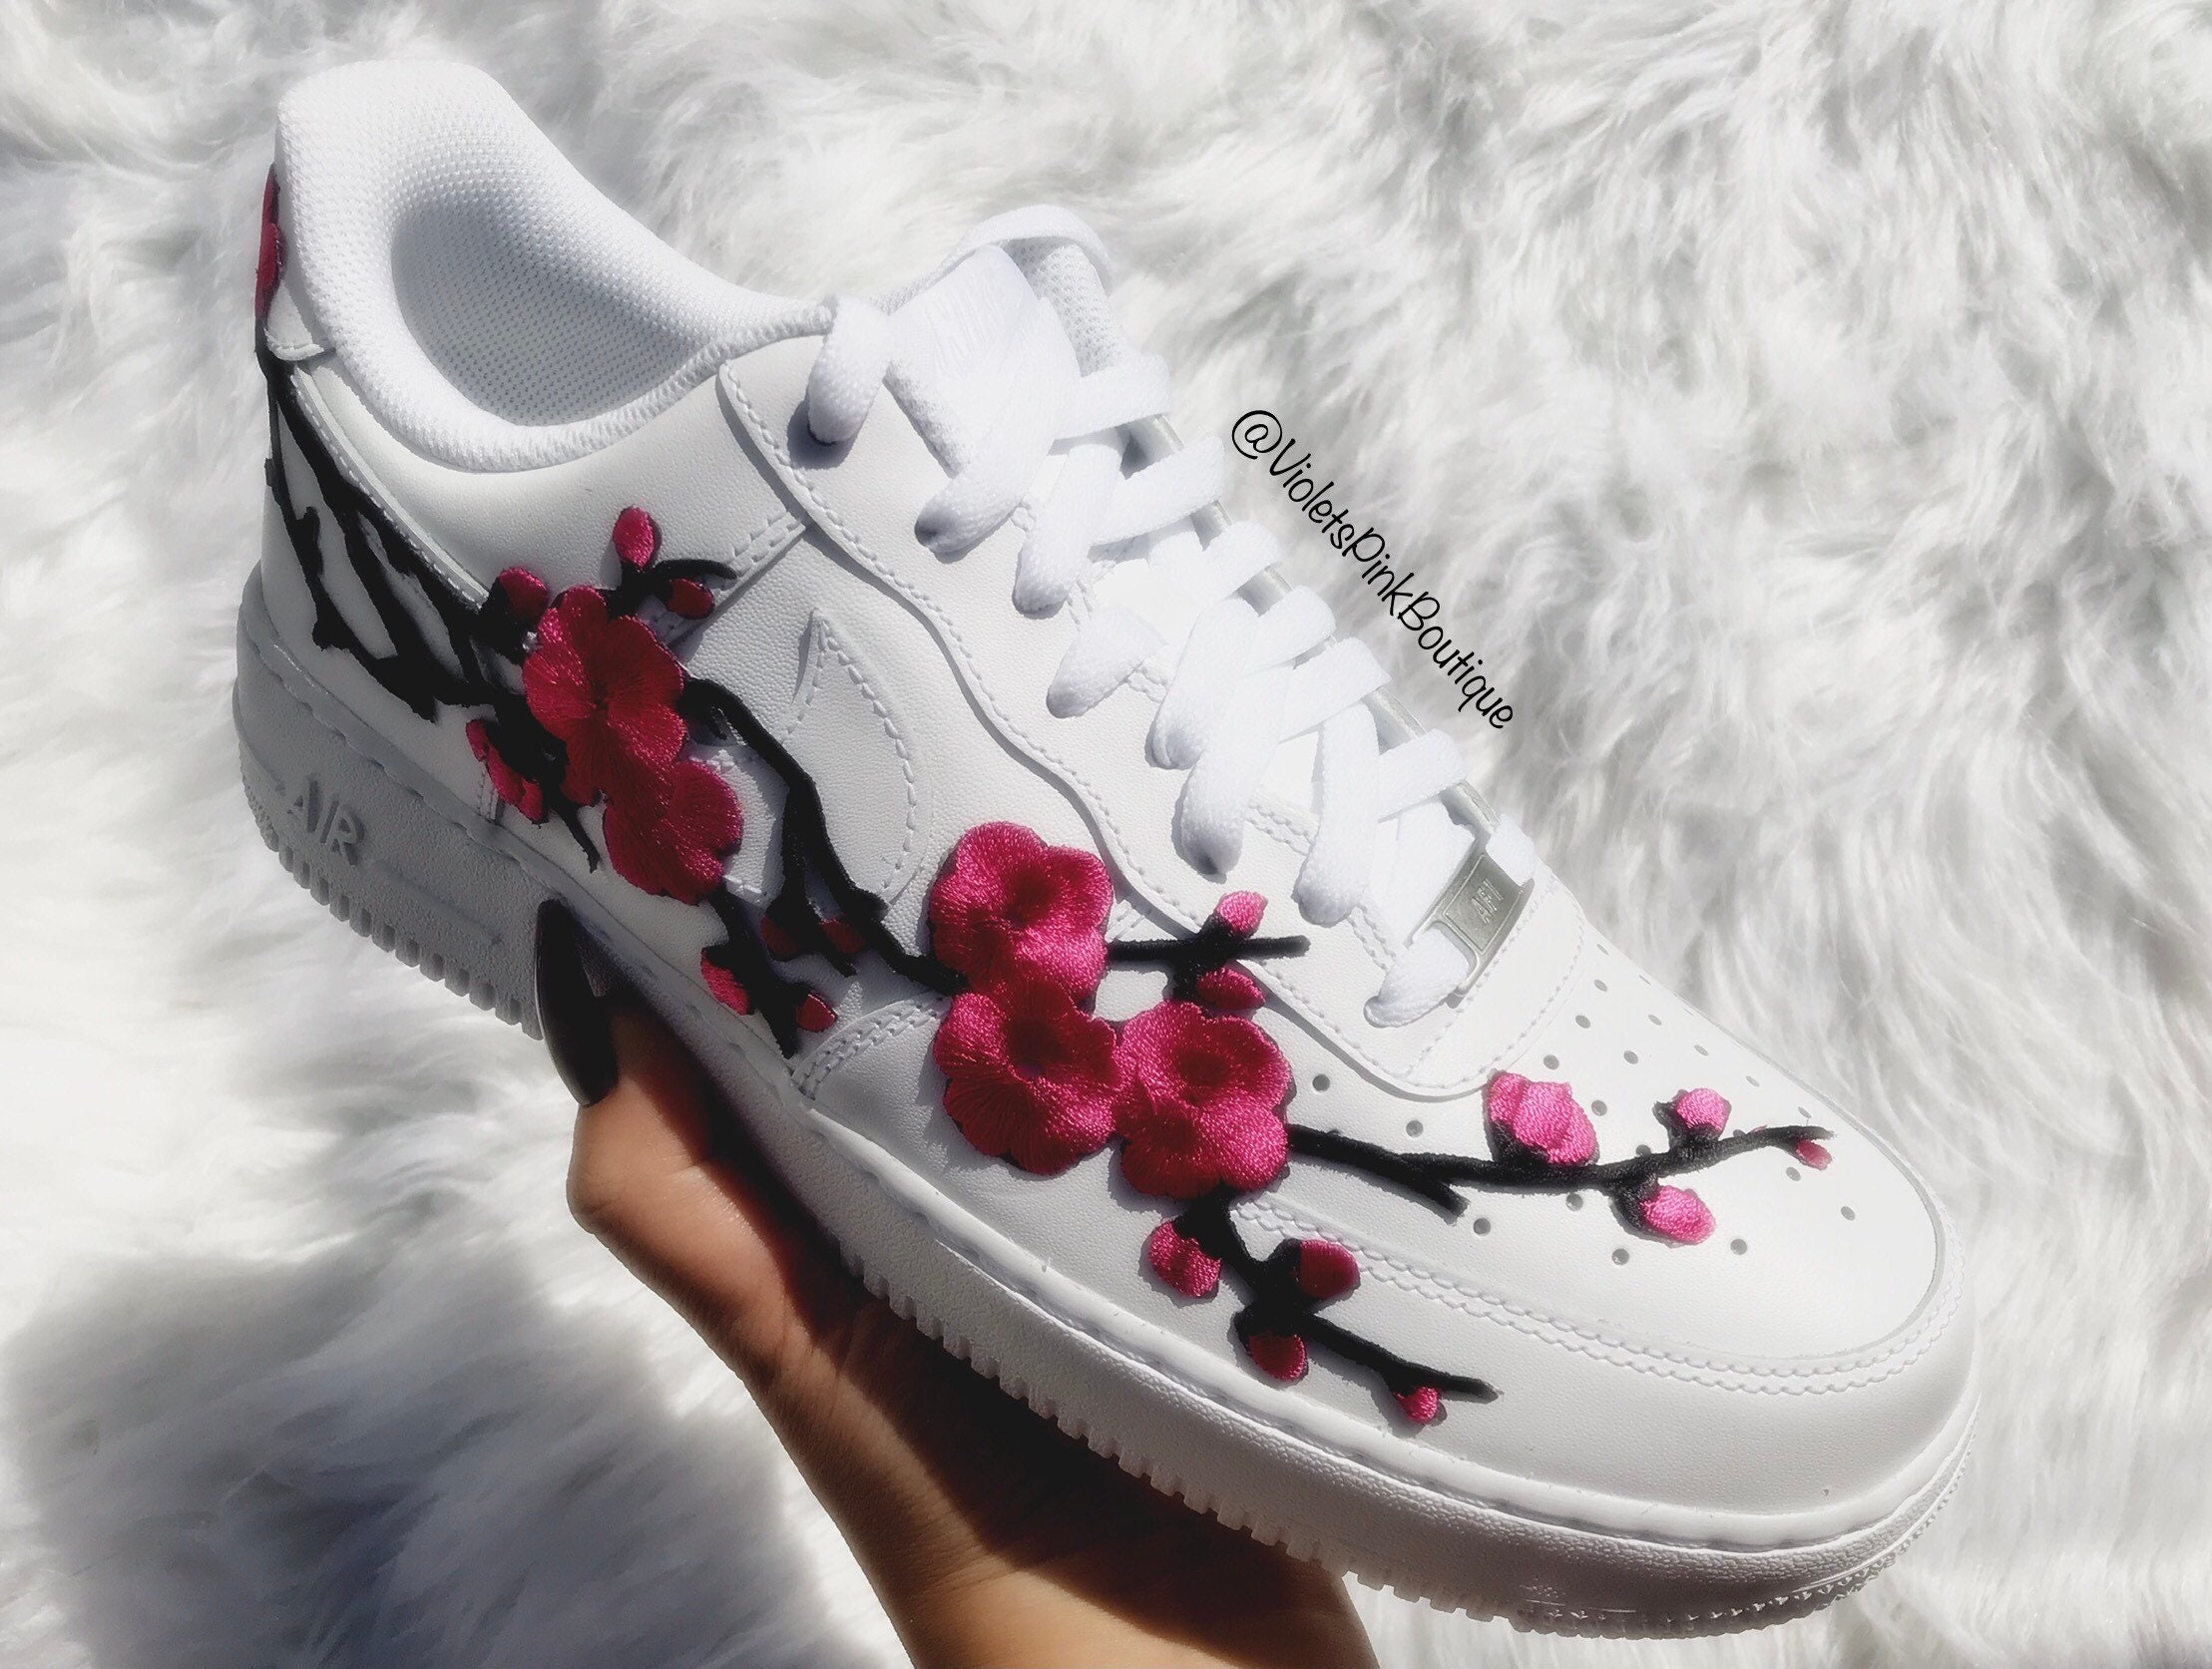 Cherry Blossom Custom Air Force 1 Sneakers 9.5 M / 11 W / Pink + White